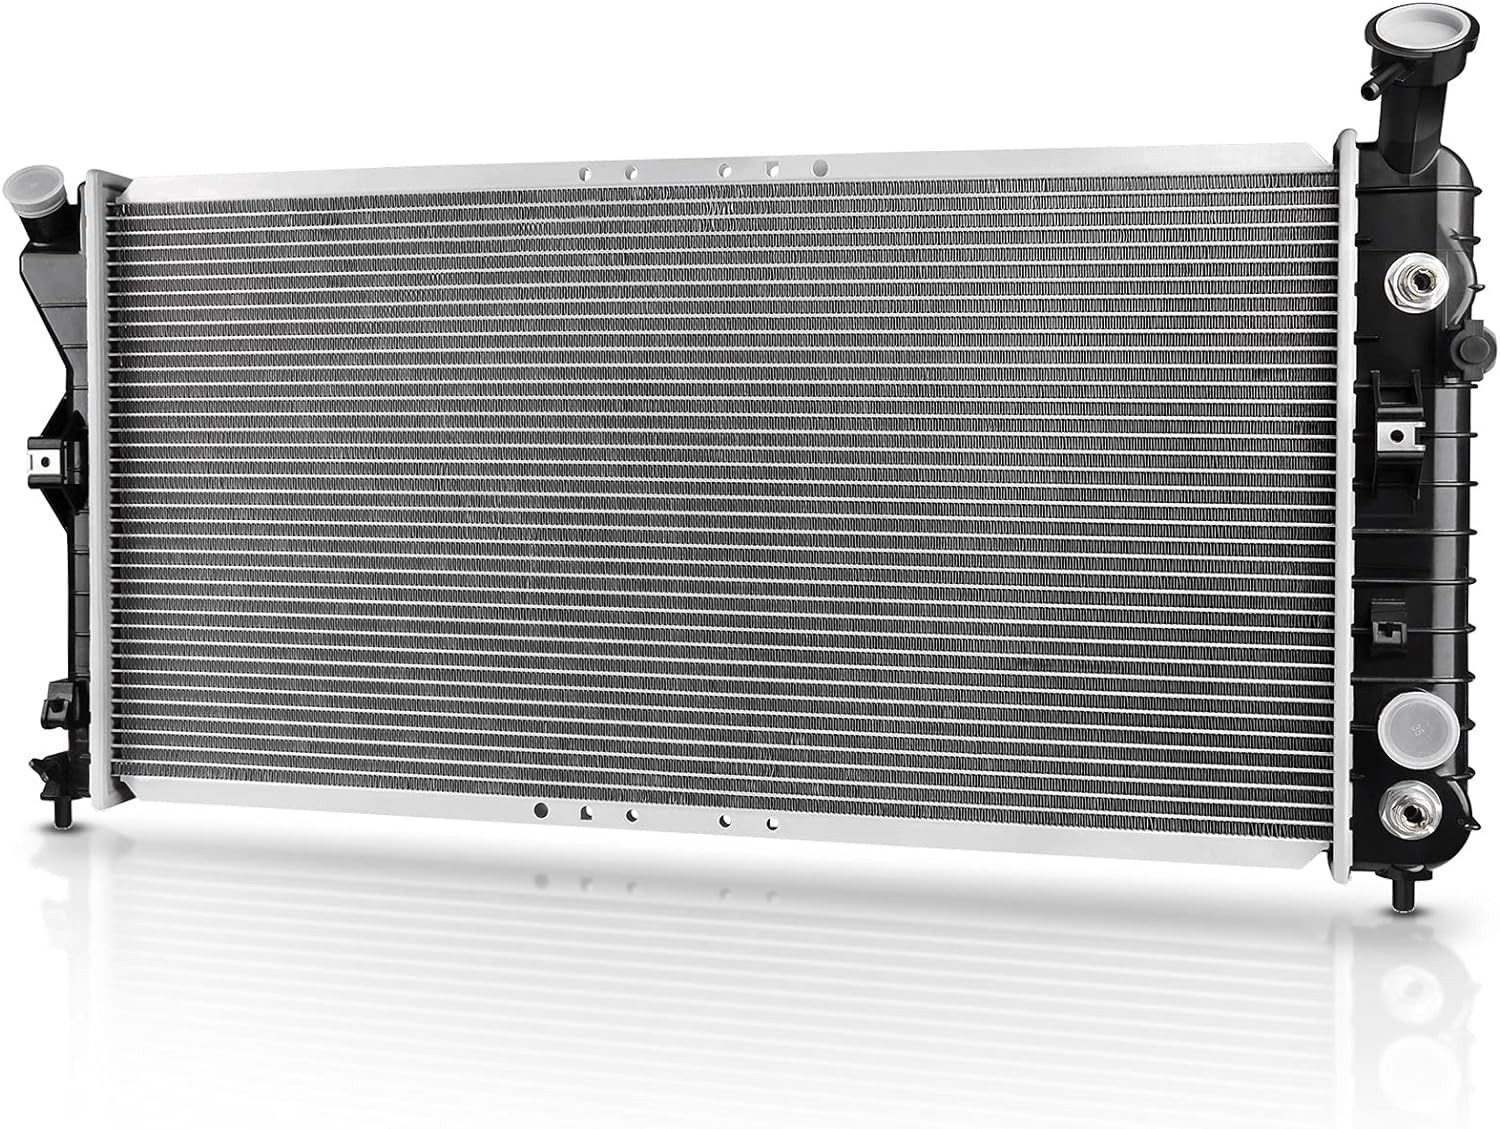 Radiator Compatible with 2000-2003 Chevy Impala, 2000-2005 Buick Century, 2000-2